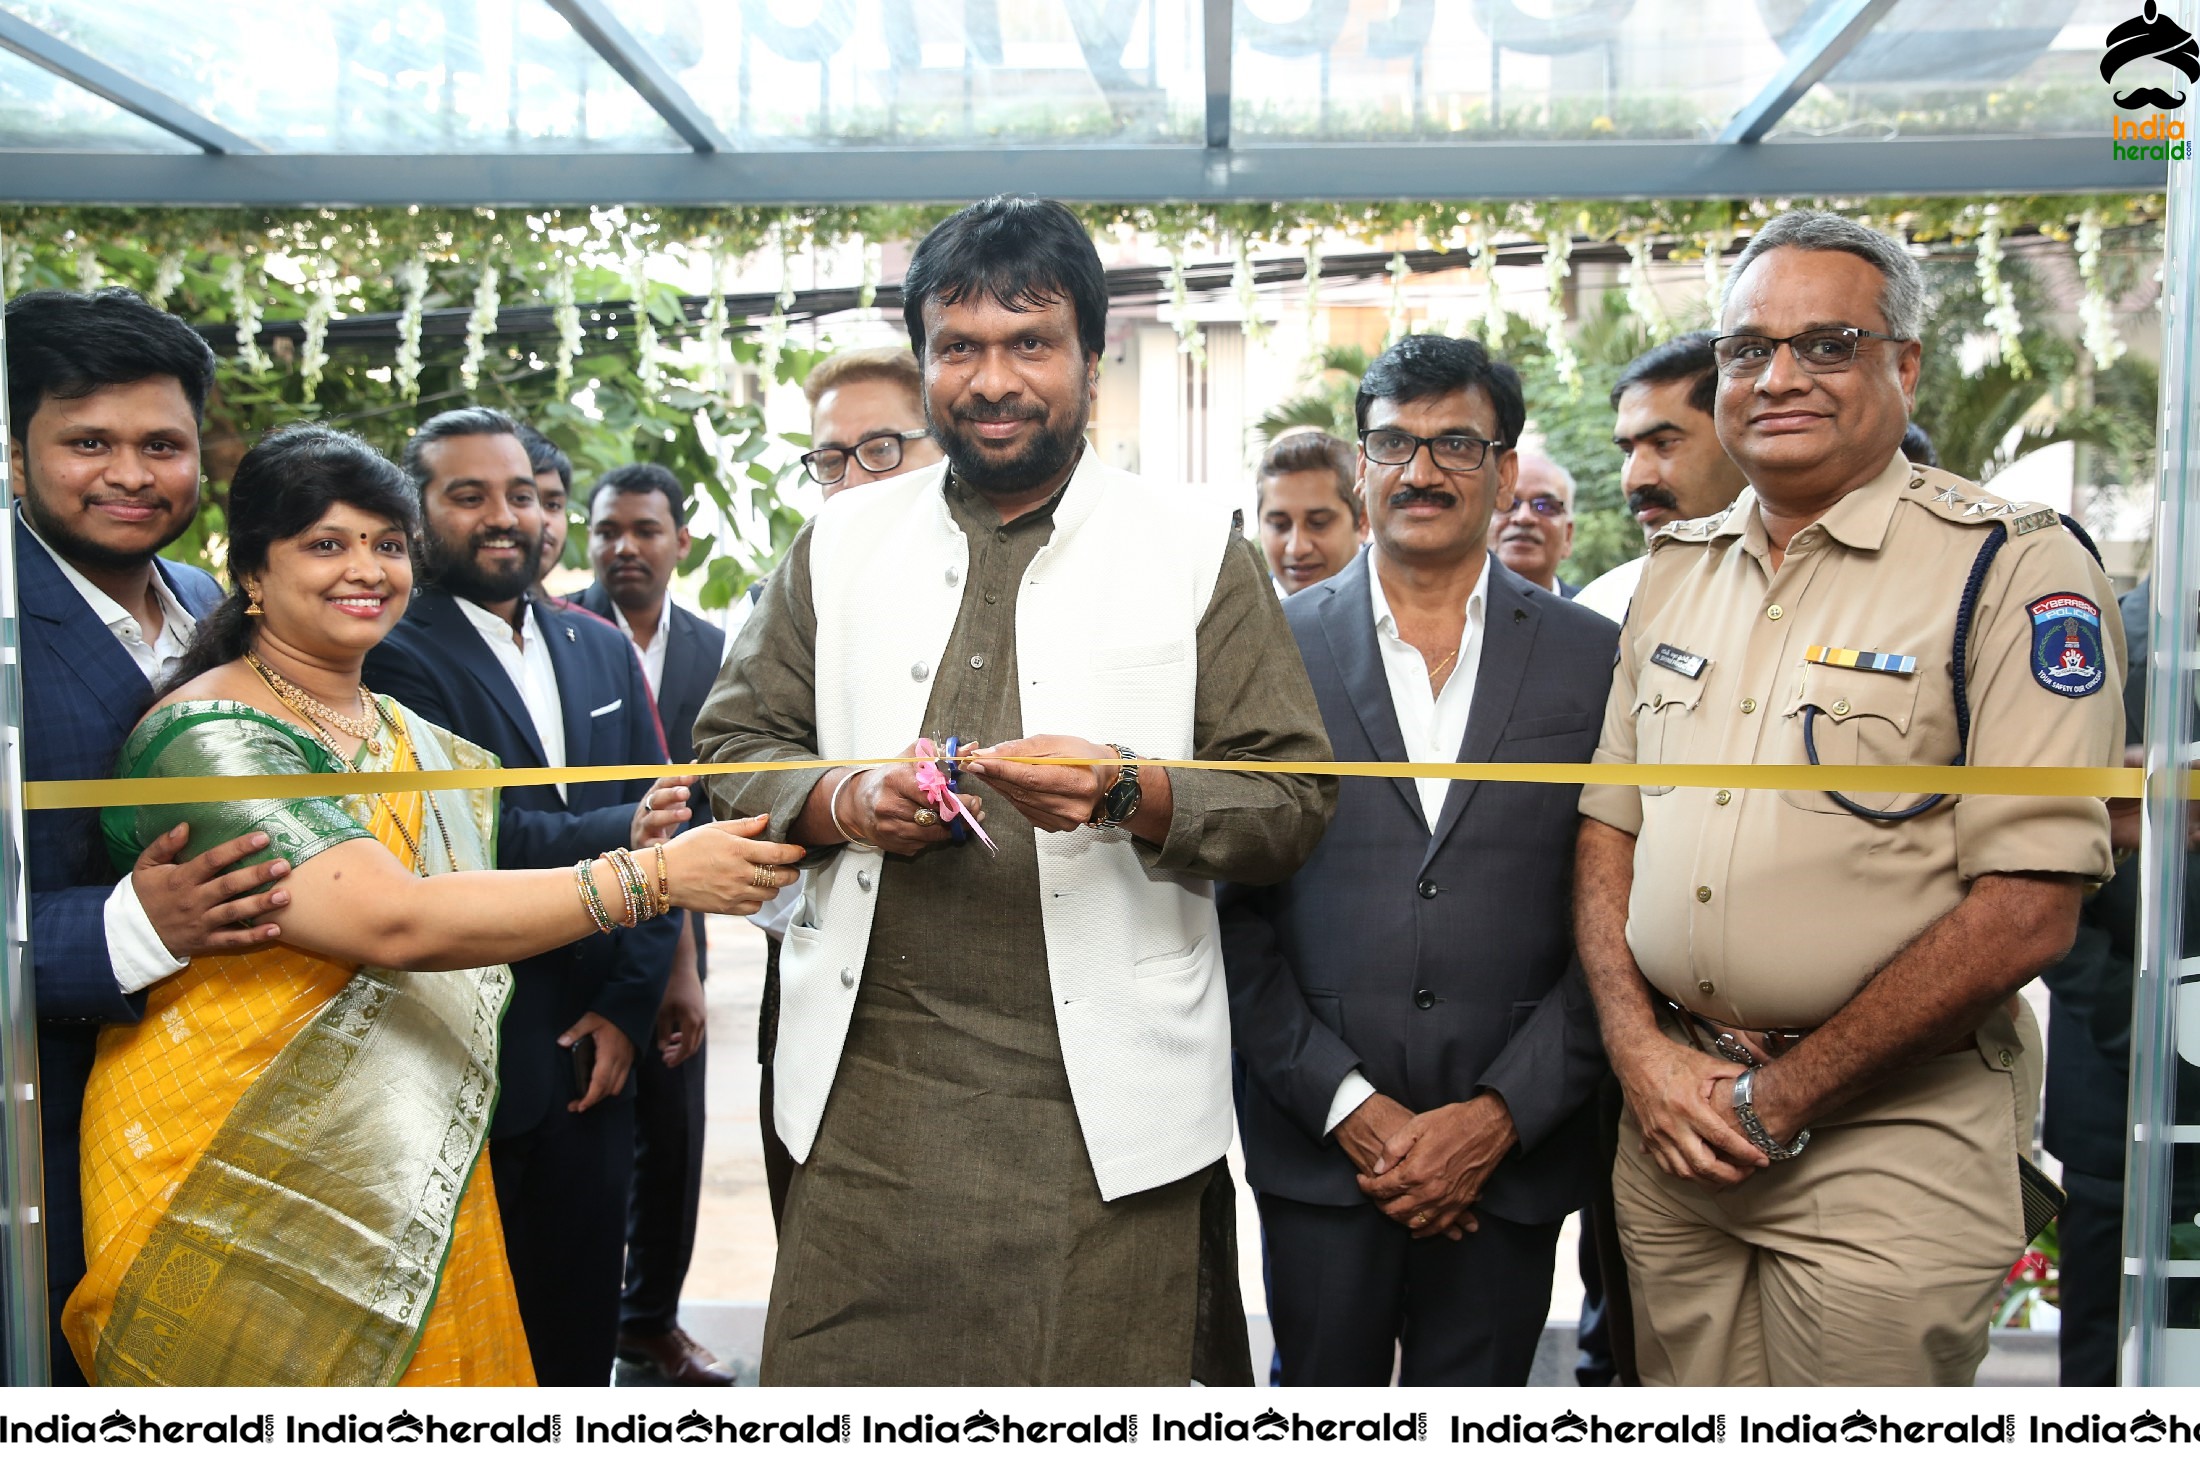 IStay Hotels Launched In Hyderabad Set 2